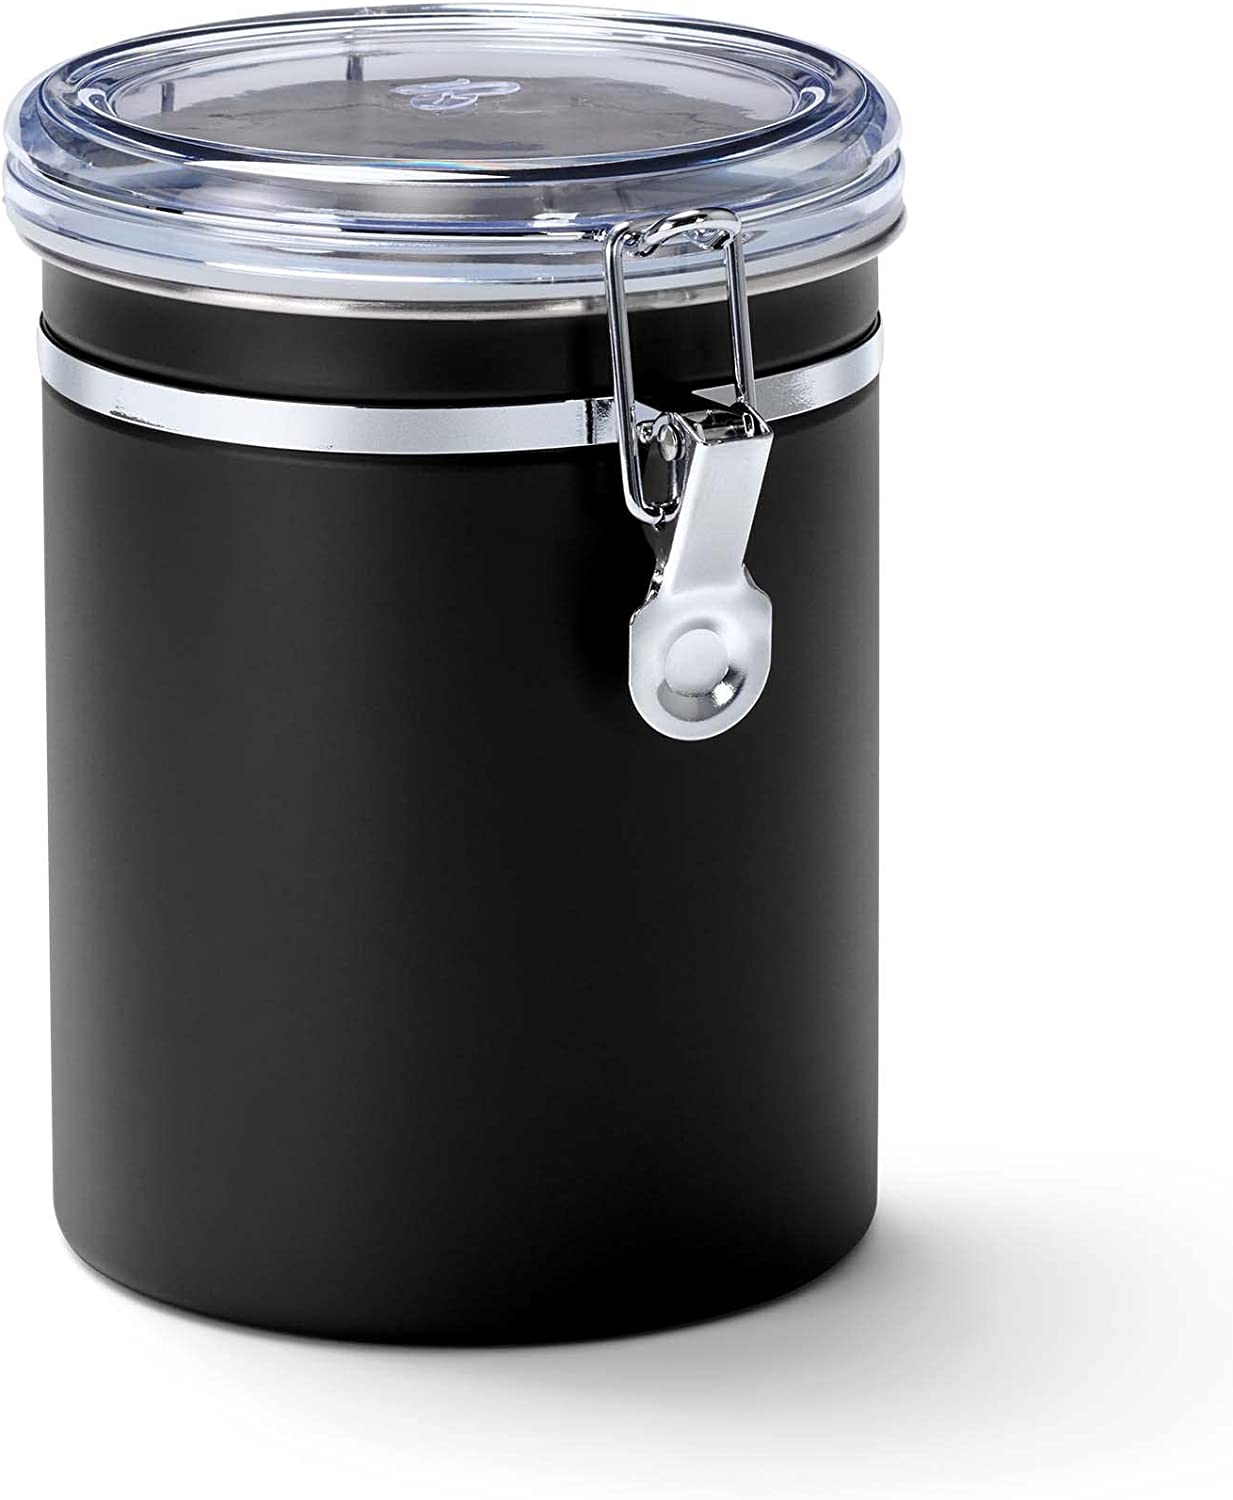 Tchibo Aroma Canister, Coffee Tin, 500 g Filling Volume, Aroma-Proof, Stainless Steel, Black